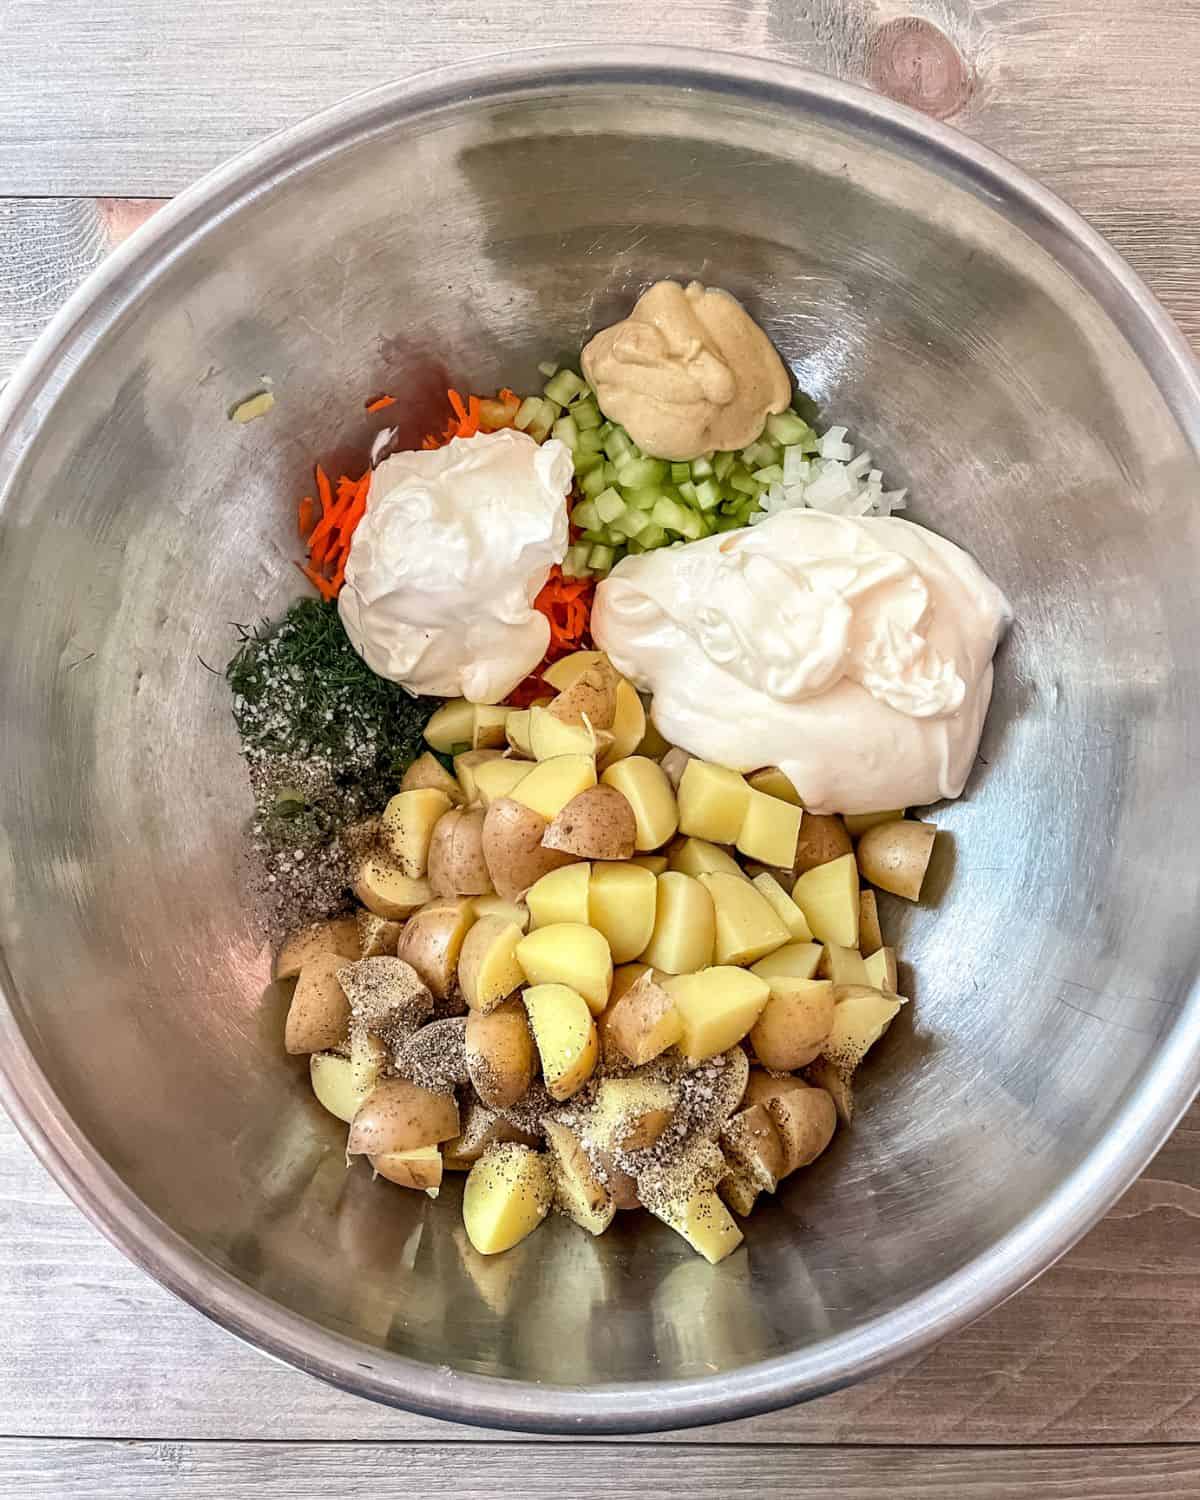 Potato salad ingredients unmixed in a large stainless steel bowl.